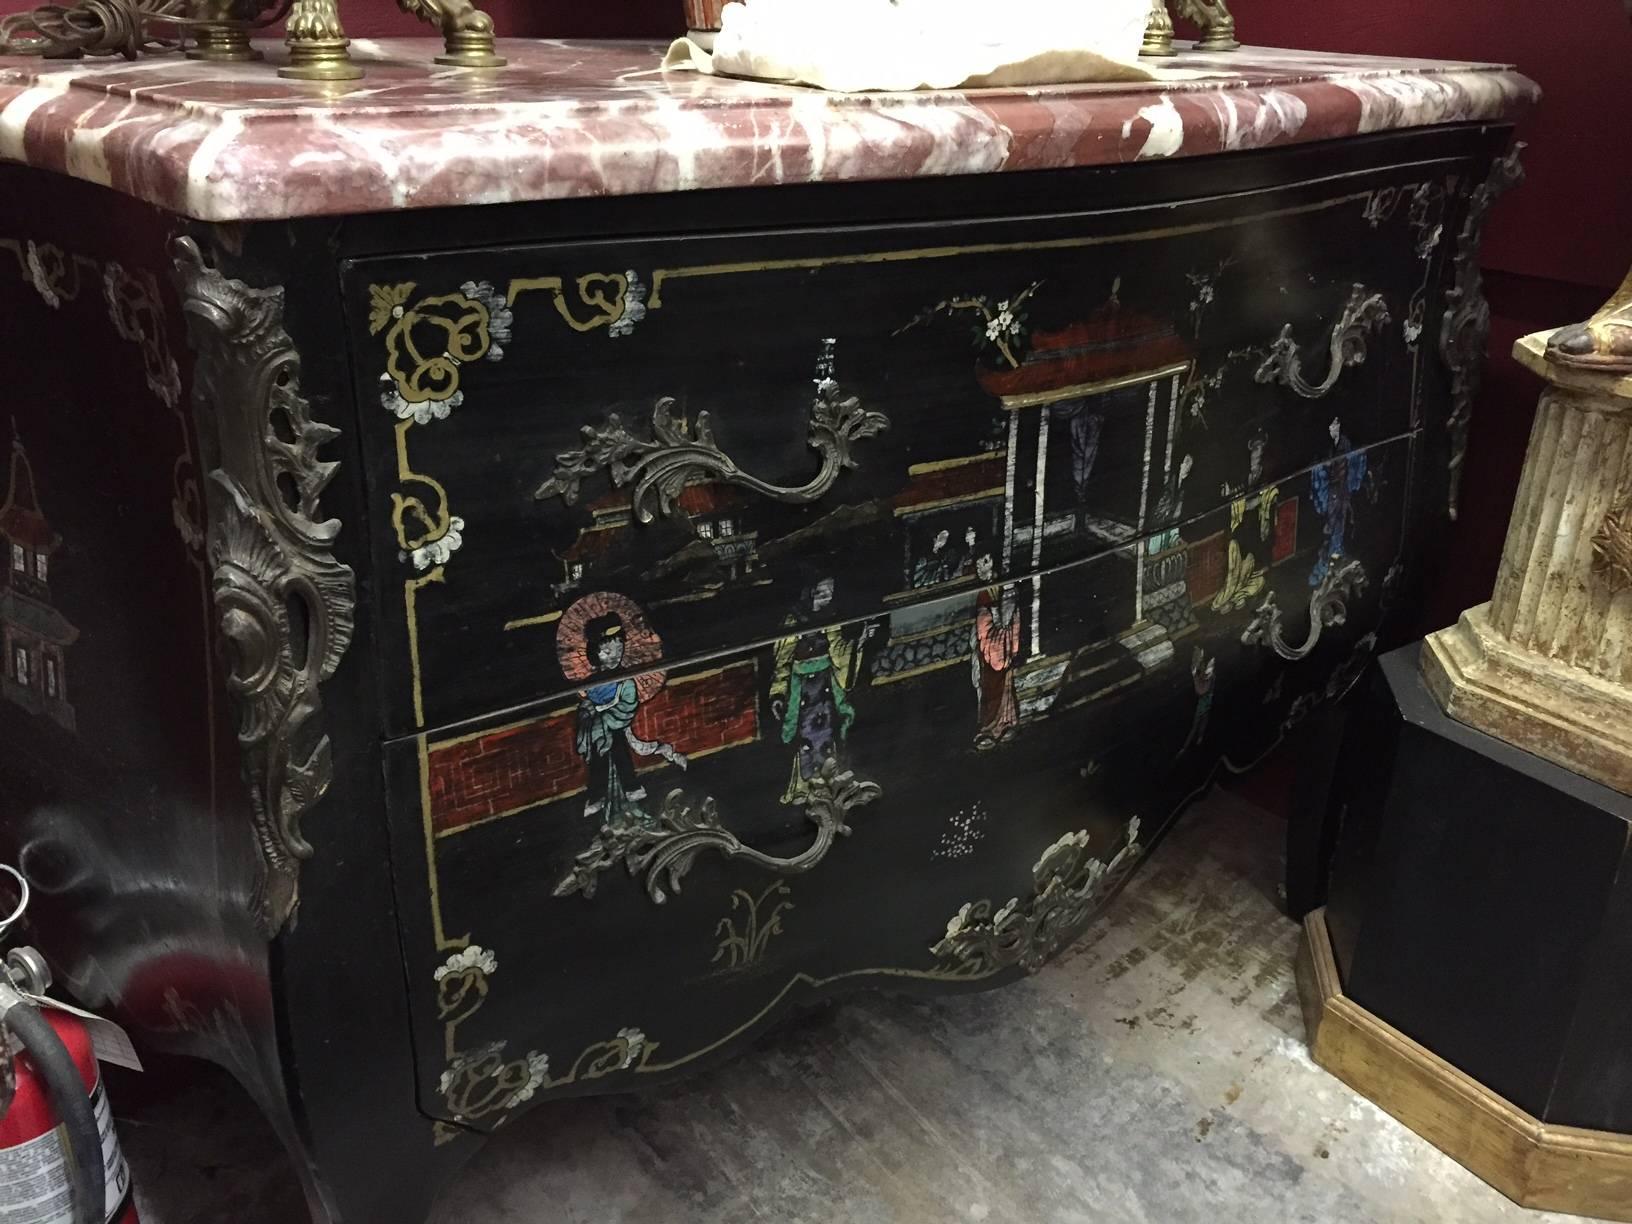 Pair of Louis XV style chinoiserie marble-topped commodes.
The unusually think marble tops over ebonized bombe commodes hand-decorated with chinoiserie motif and bronze-mounted with intricate foliage work, all resting on four cabriole legs ending